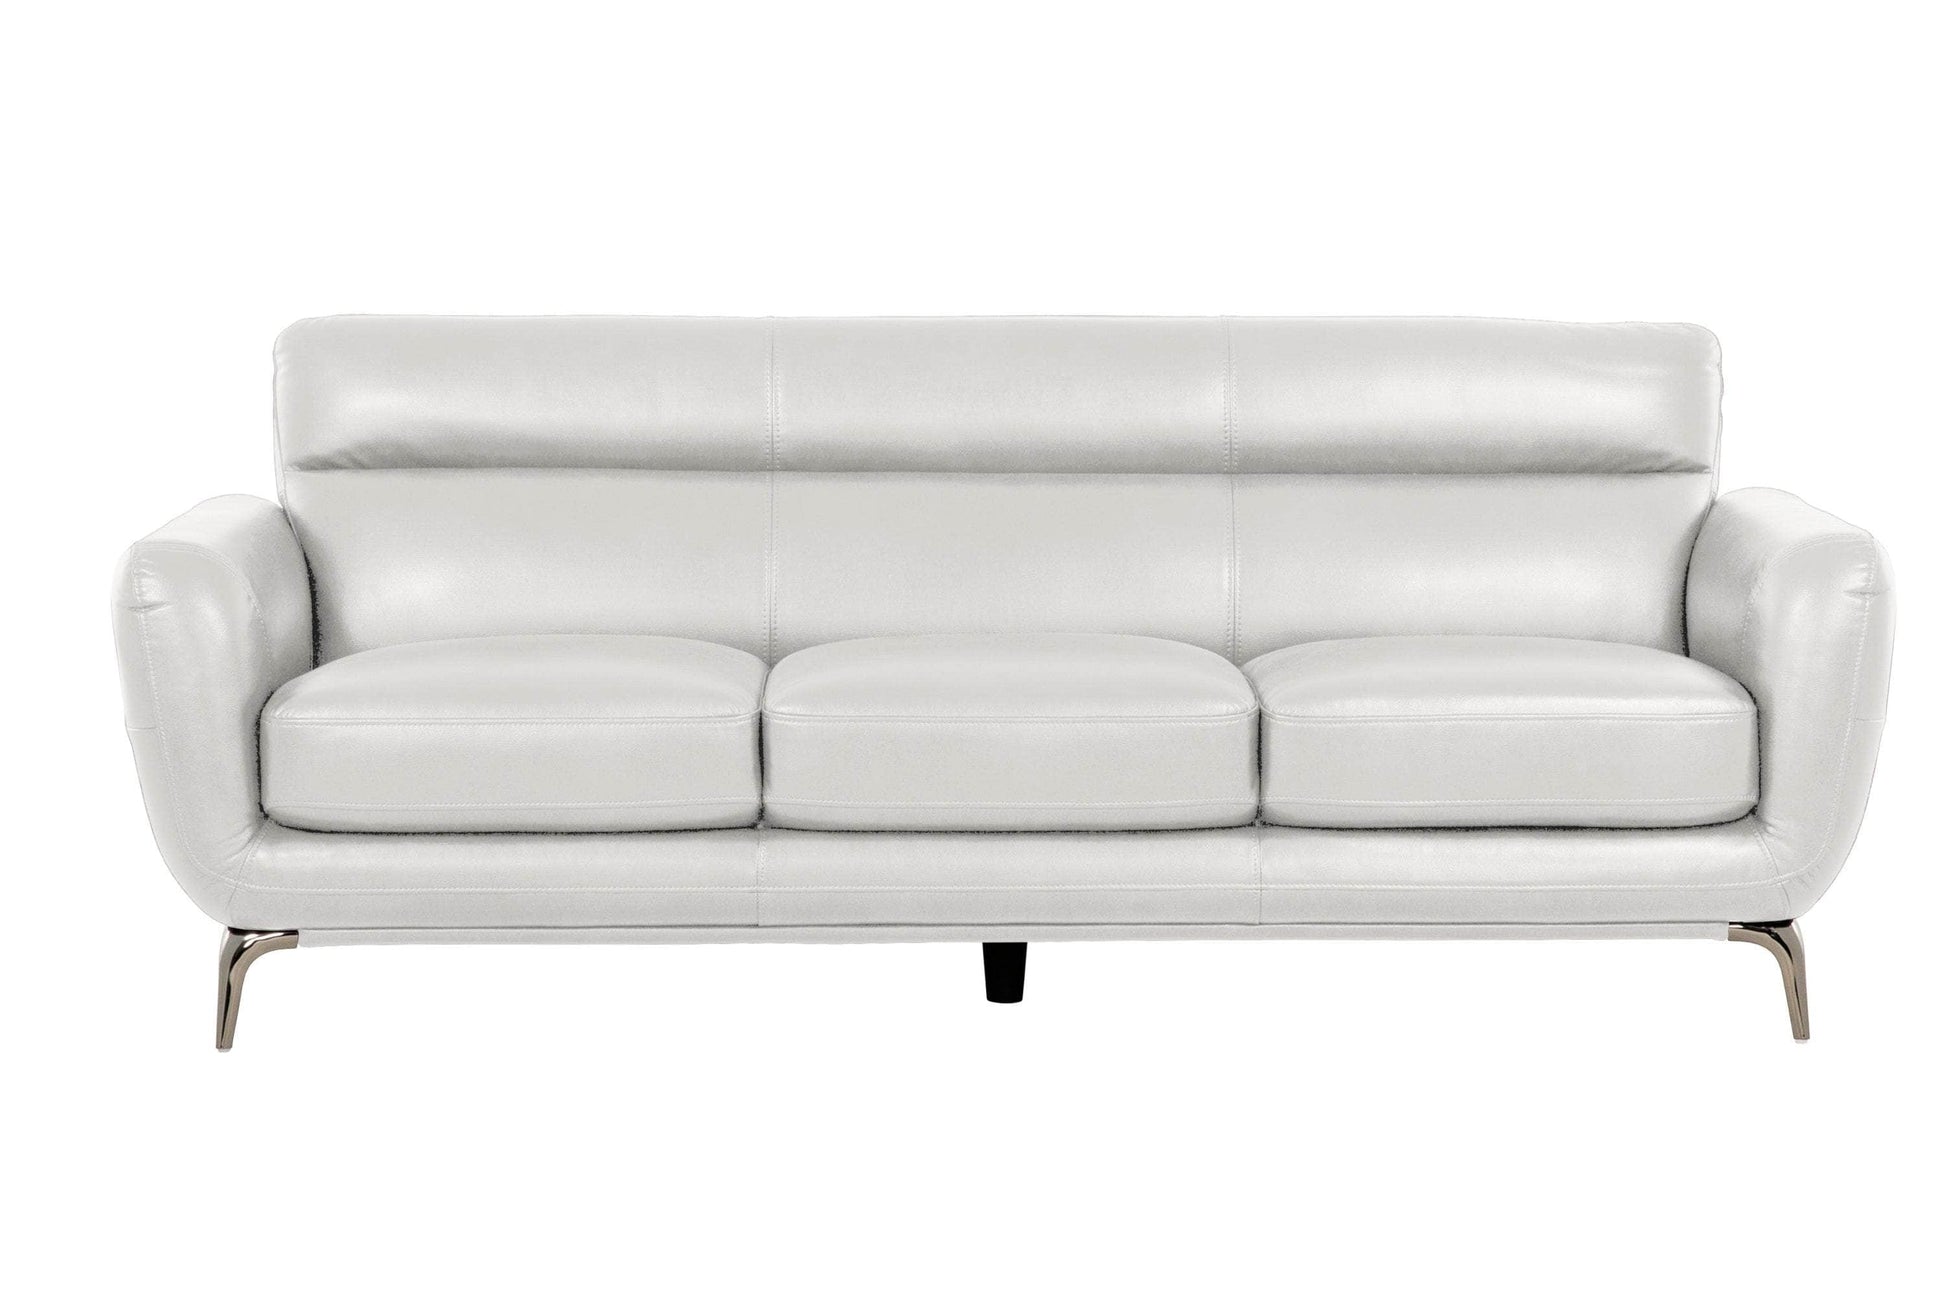 True Contemporary Sofa Grey William Tufted Faux Leather Sofa - Available in 2 Colours